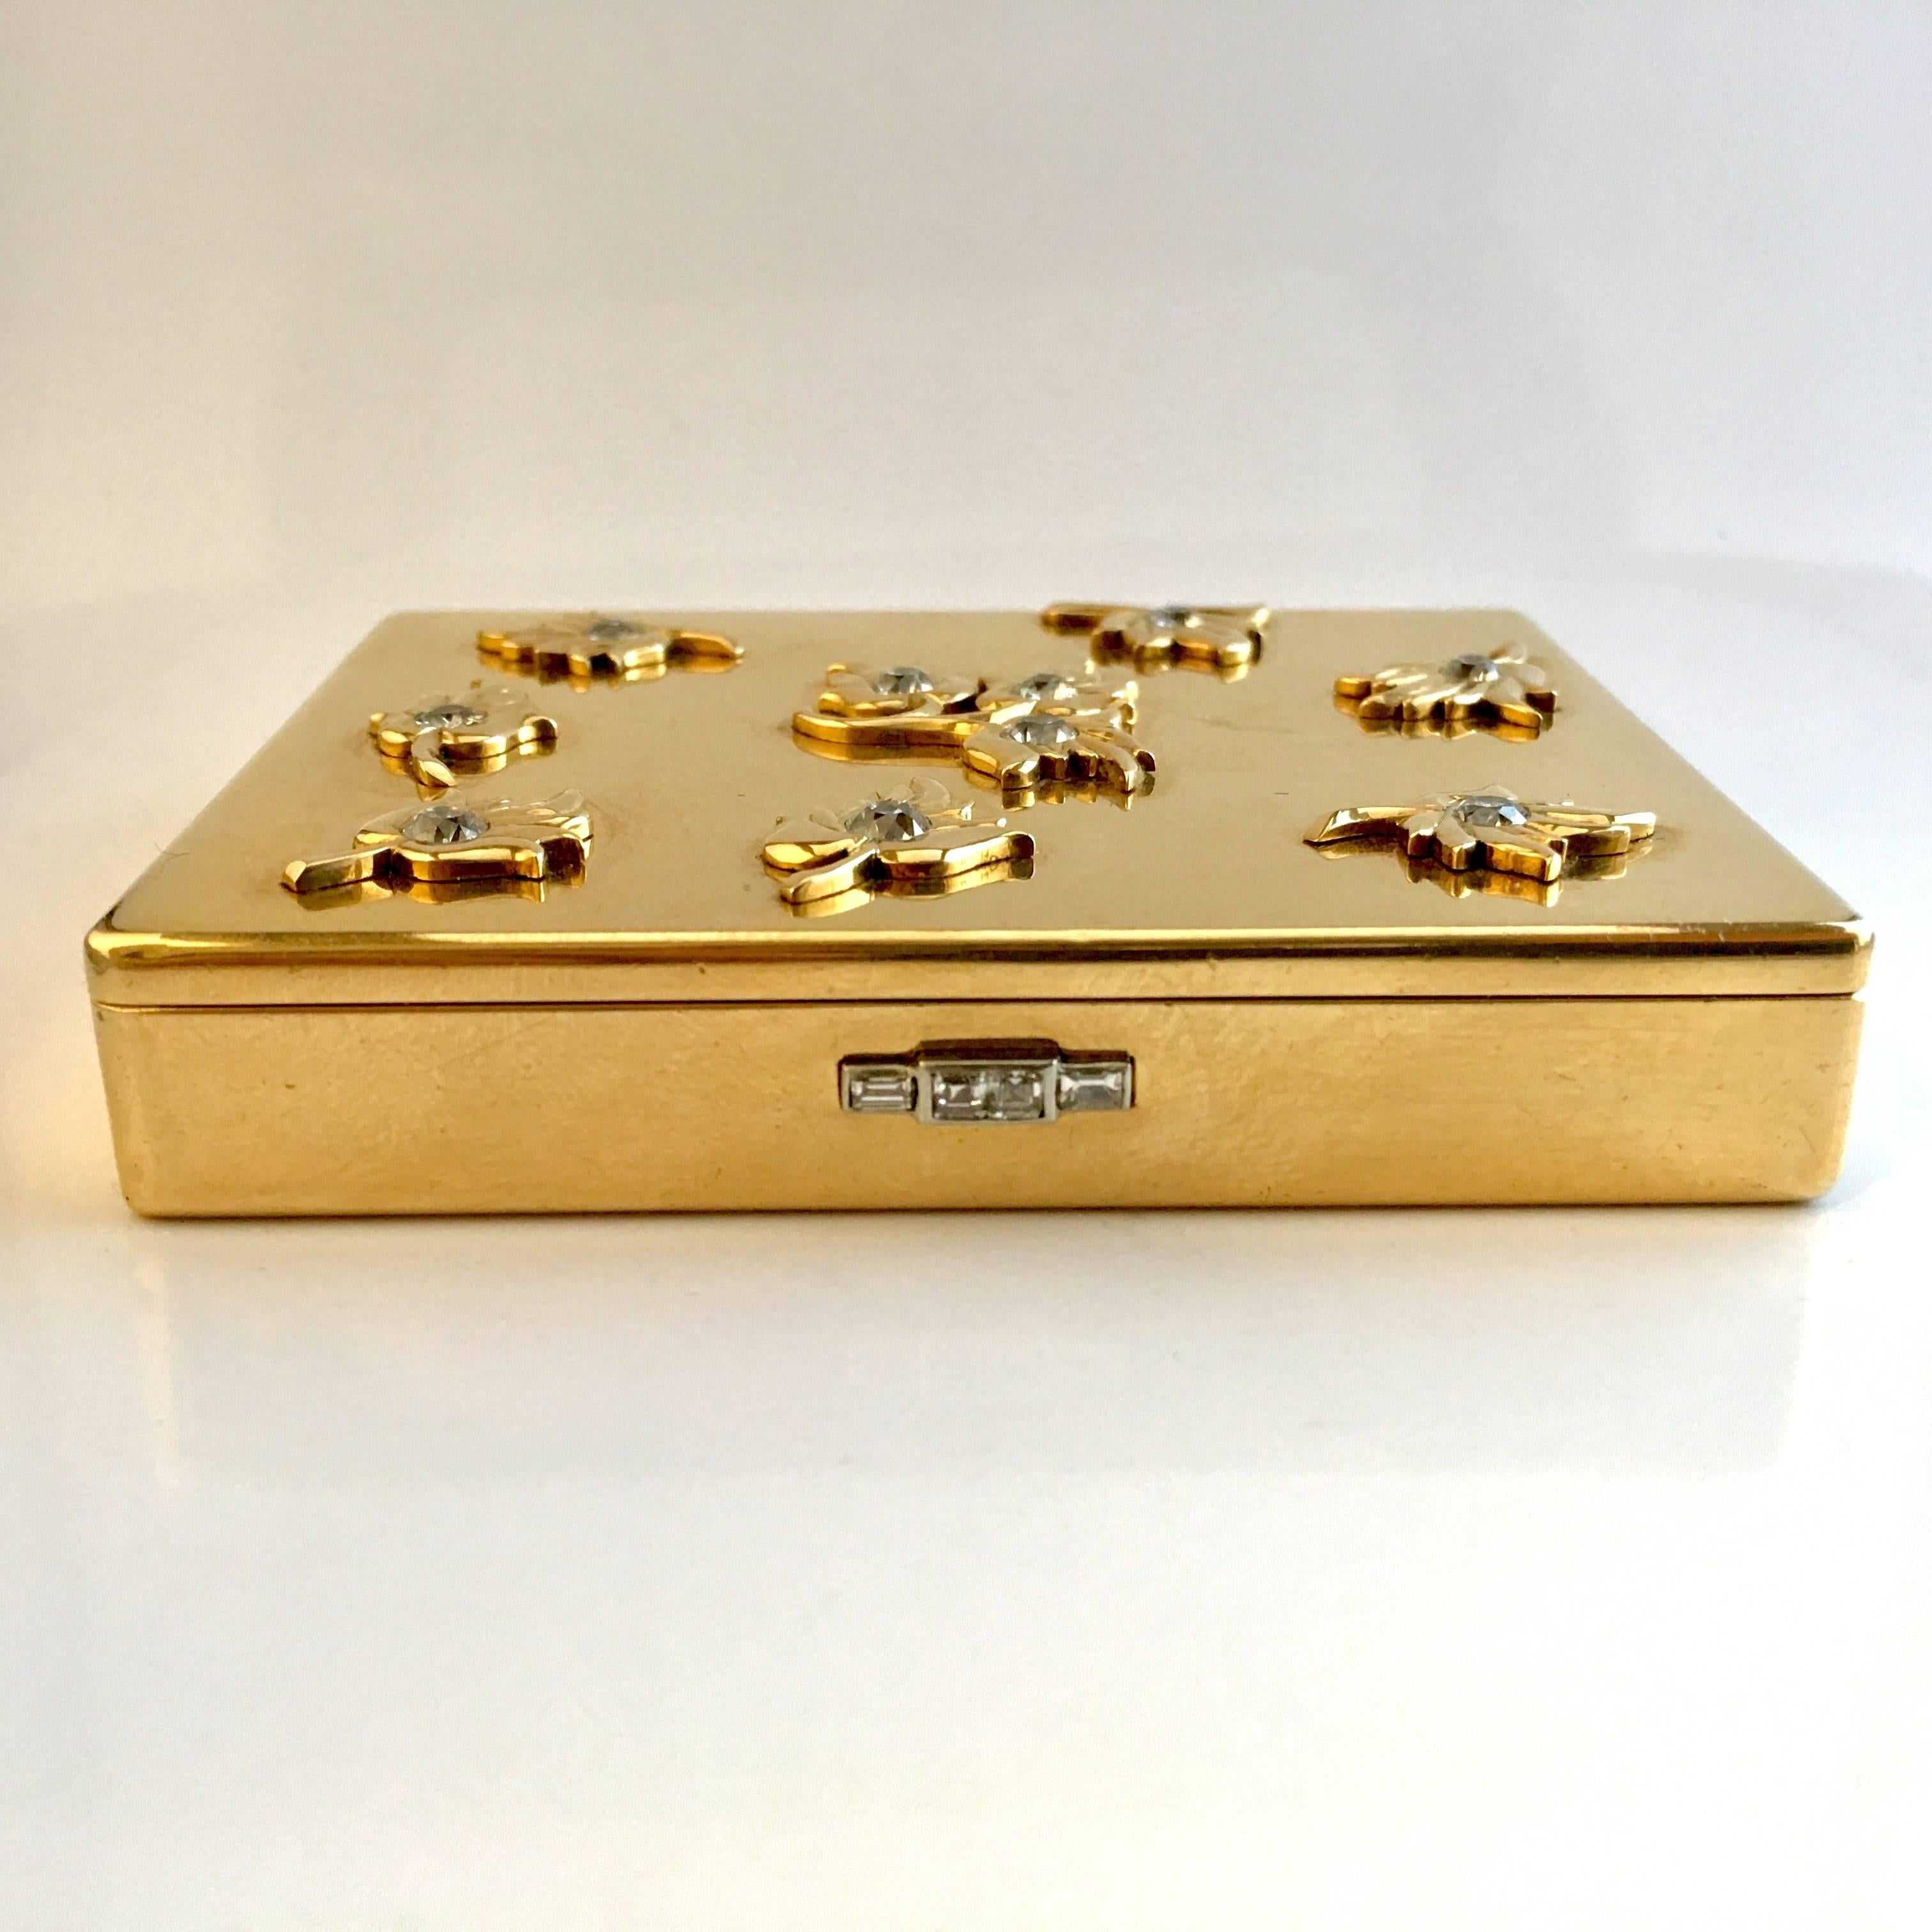 A very charming case by Cartier in 18k yellow gold from the 1940s period. The lid is decorated with 10 golden leafs each set with an old brilliant cut diamond and the clasp is set with square cut diamonds. The total diamond weight is approximately